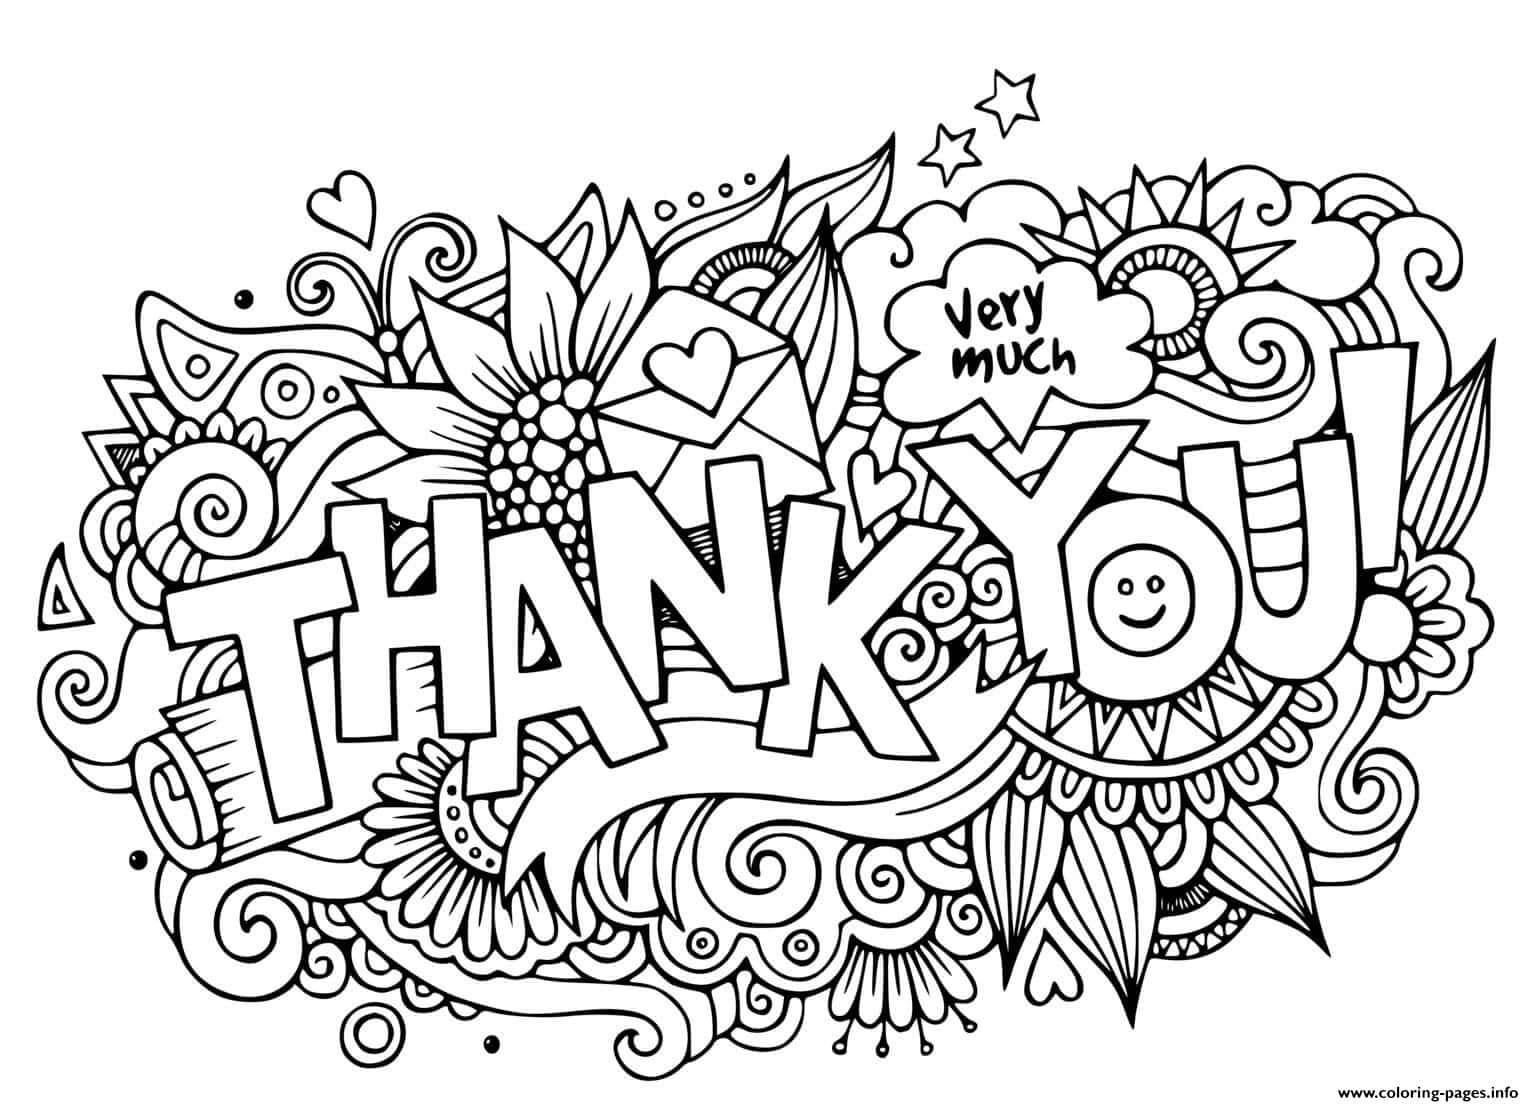 coloring pages for adults halloween | gratitude coloring pages | being thankful coloring pages